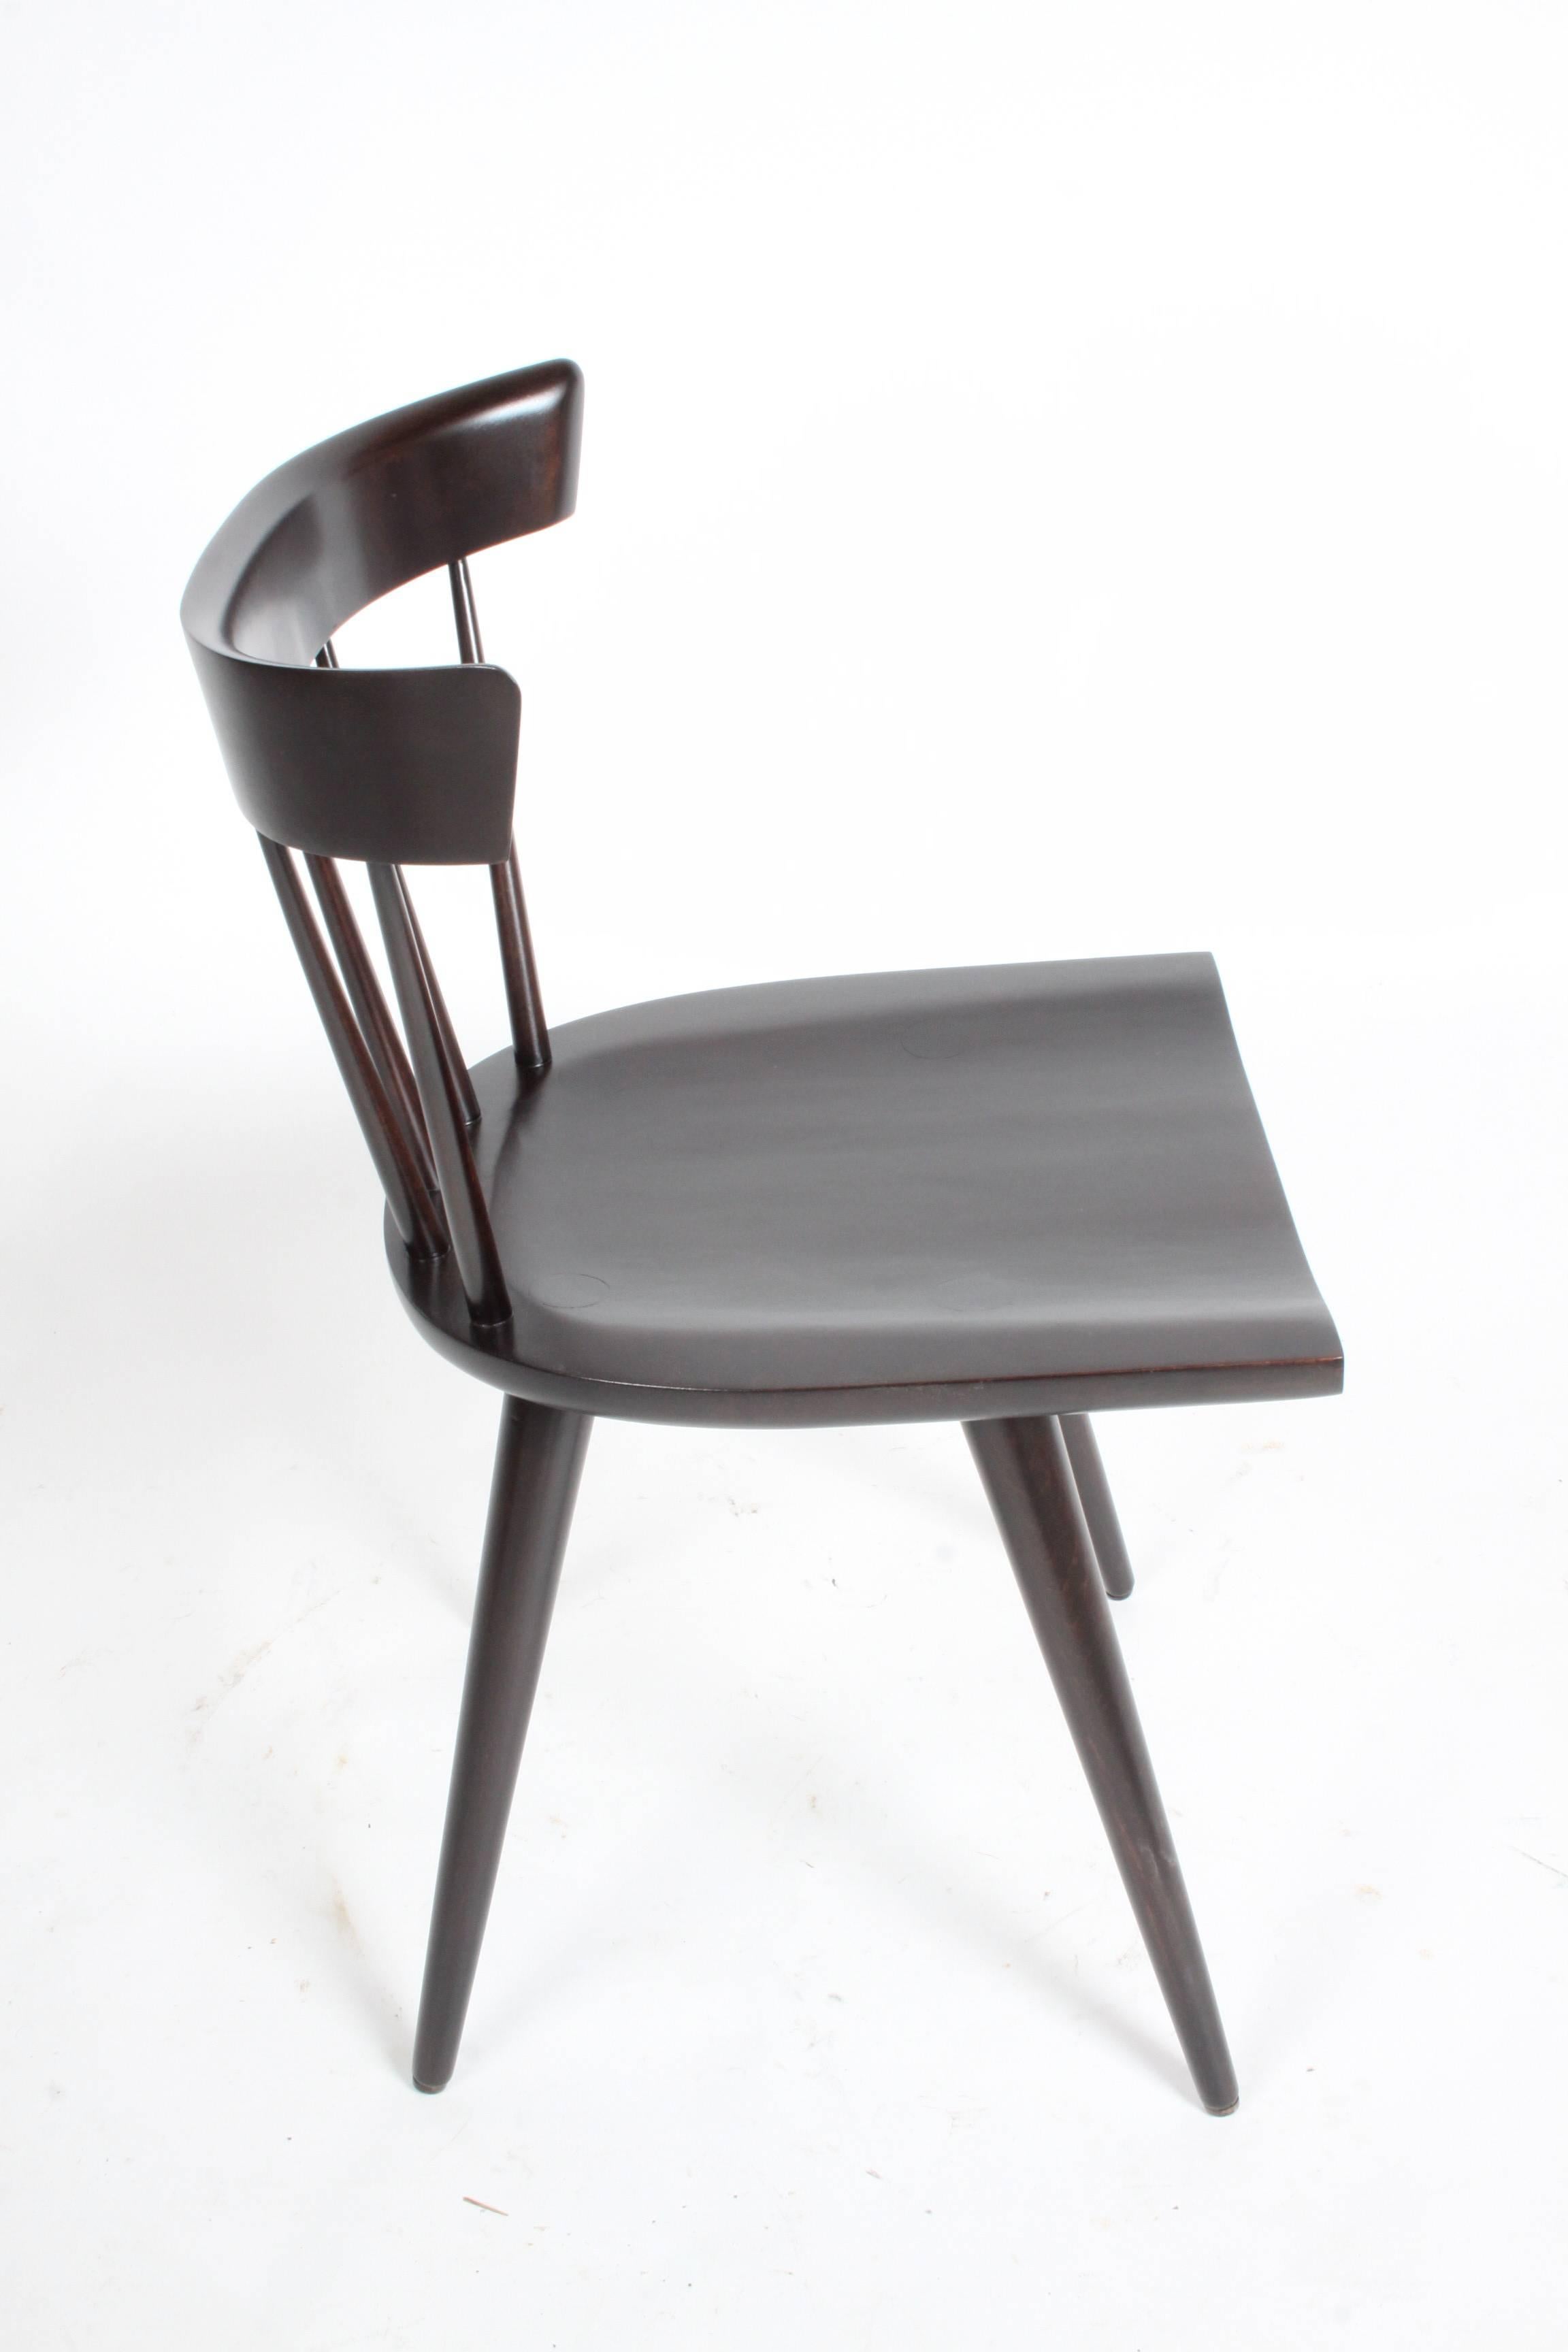 Paul McCobb Spindle Back Dining or Desk Chair for Planner Group In Excellent Condition For Sale In St. Louis, MO